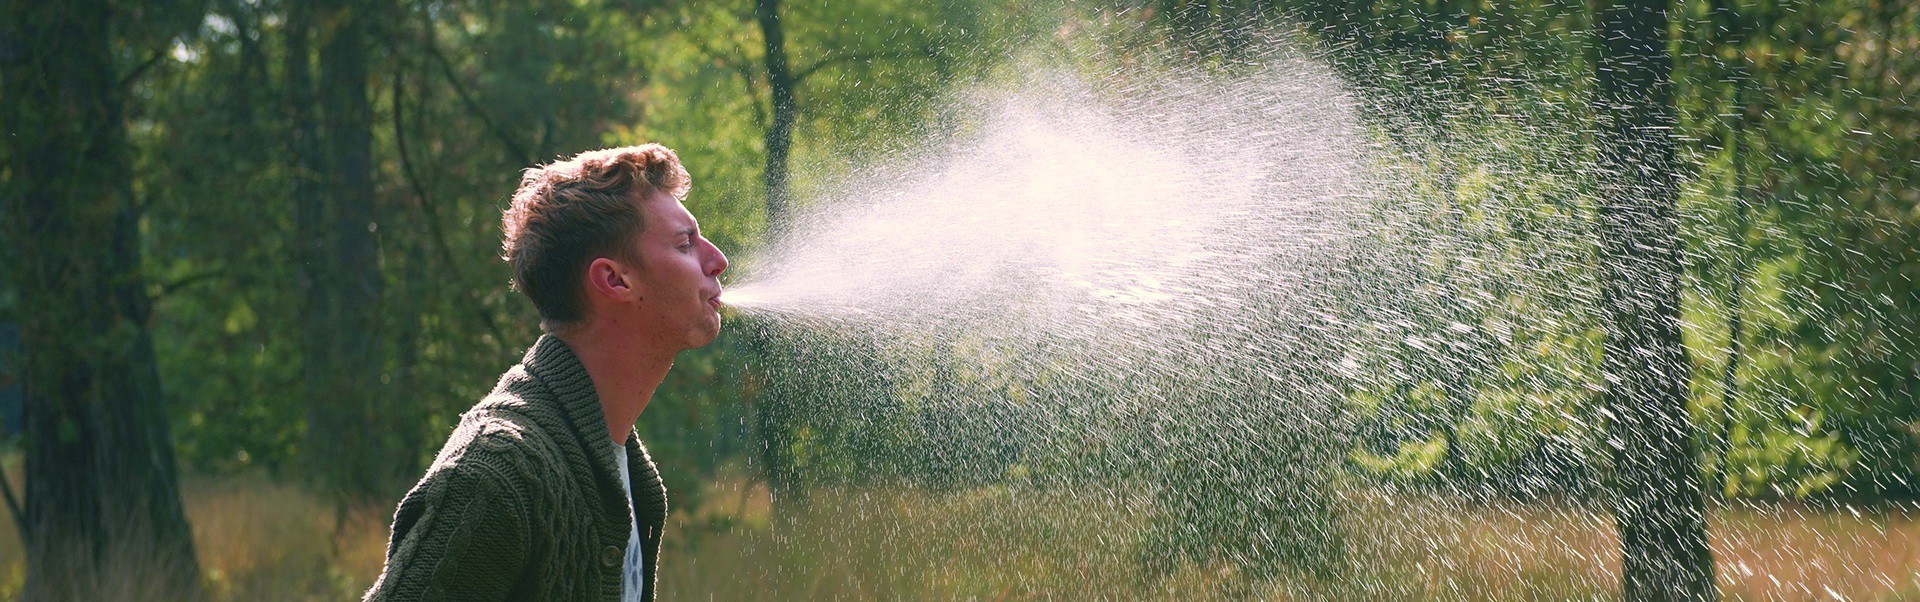 person spitting spray of liquid in the air